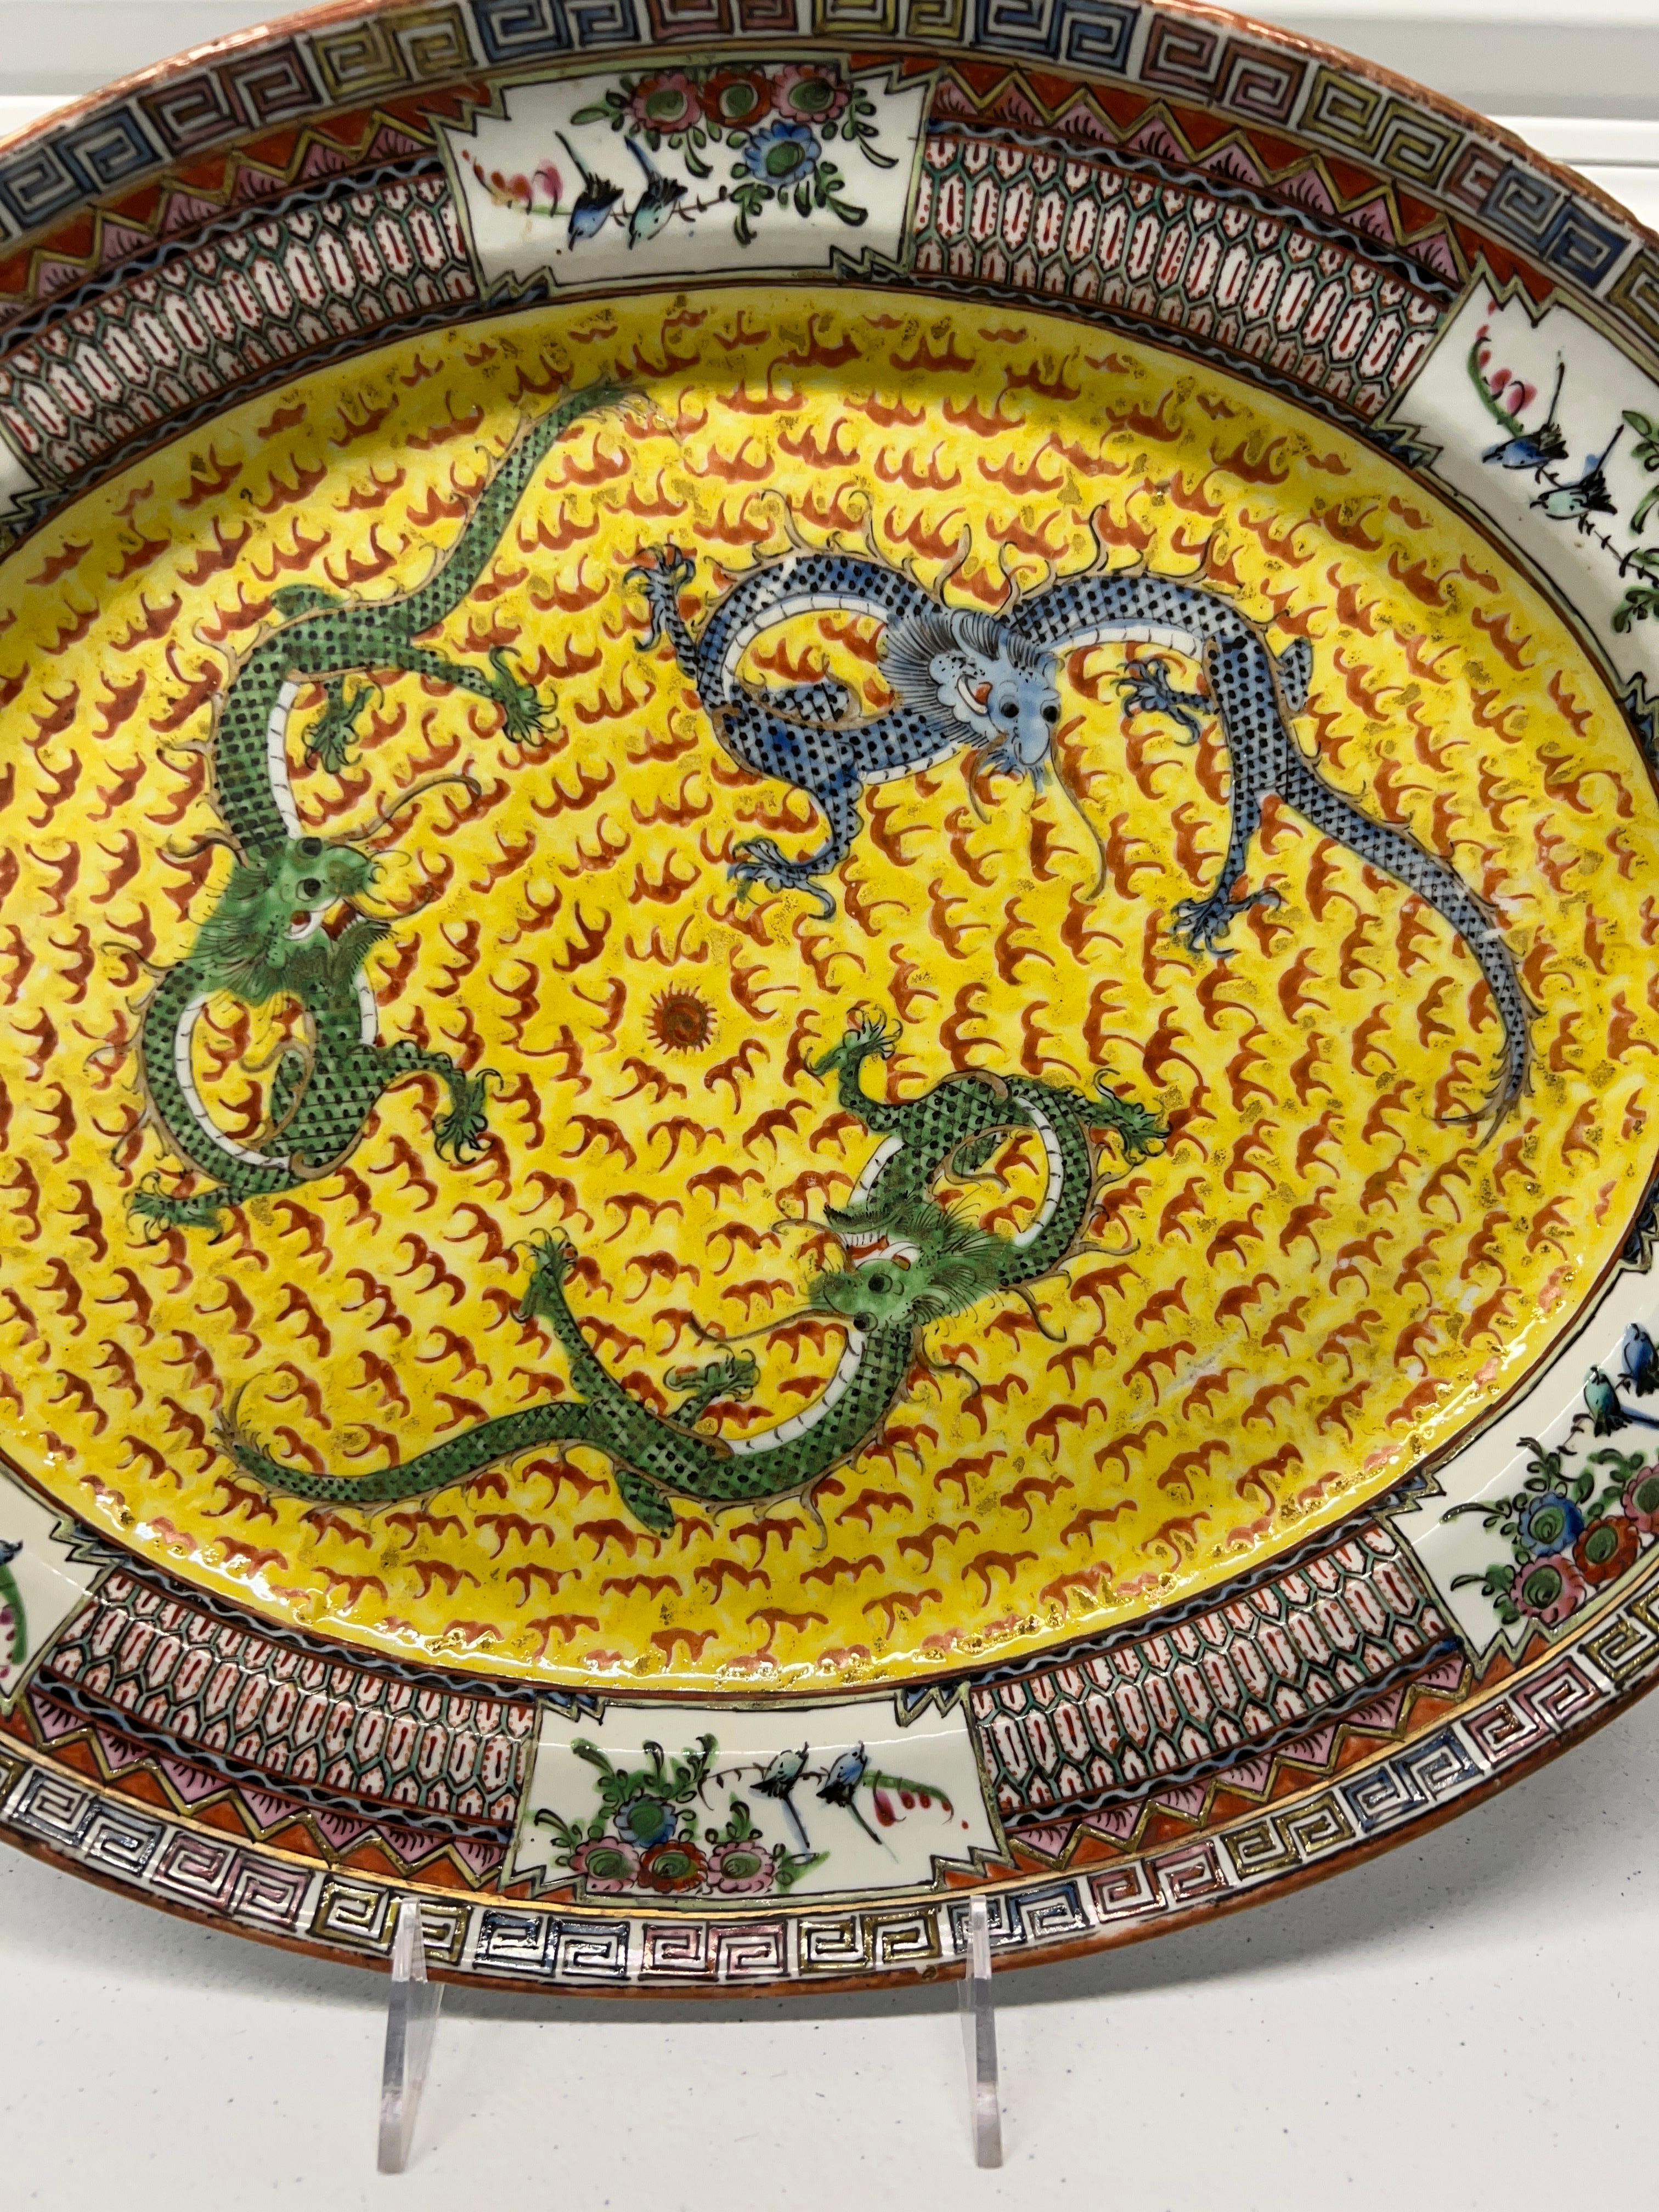 Chinese, early to mid 19th century.

An antique famille jaune platter decorated with 3 imperial dragons chasing the central pearl. A good quality enameled edge with greek key style bordering. Marked to the unglazed bottom 